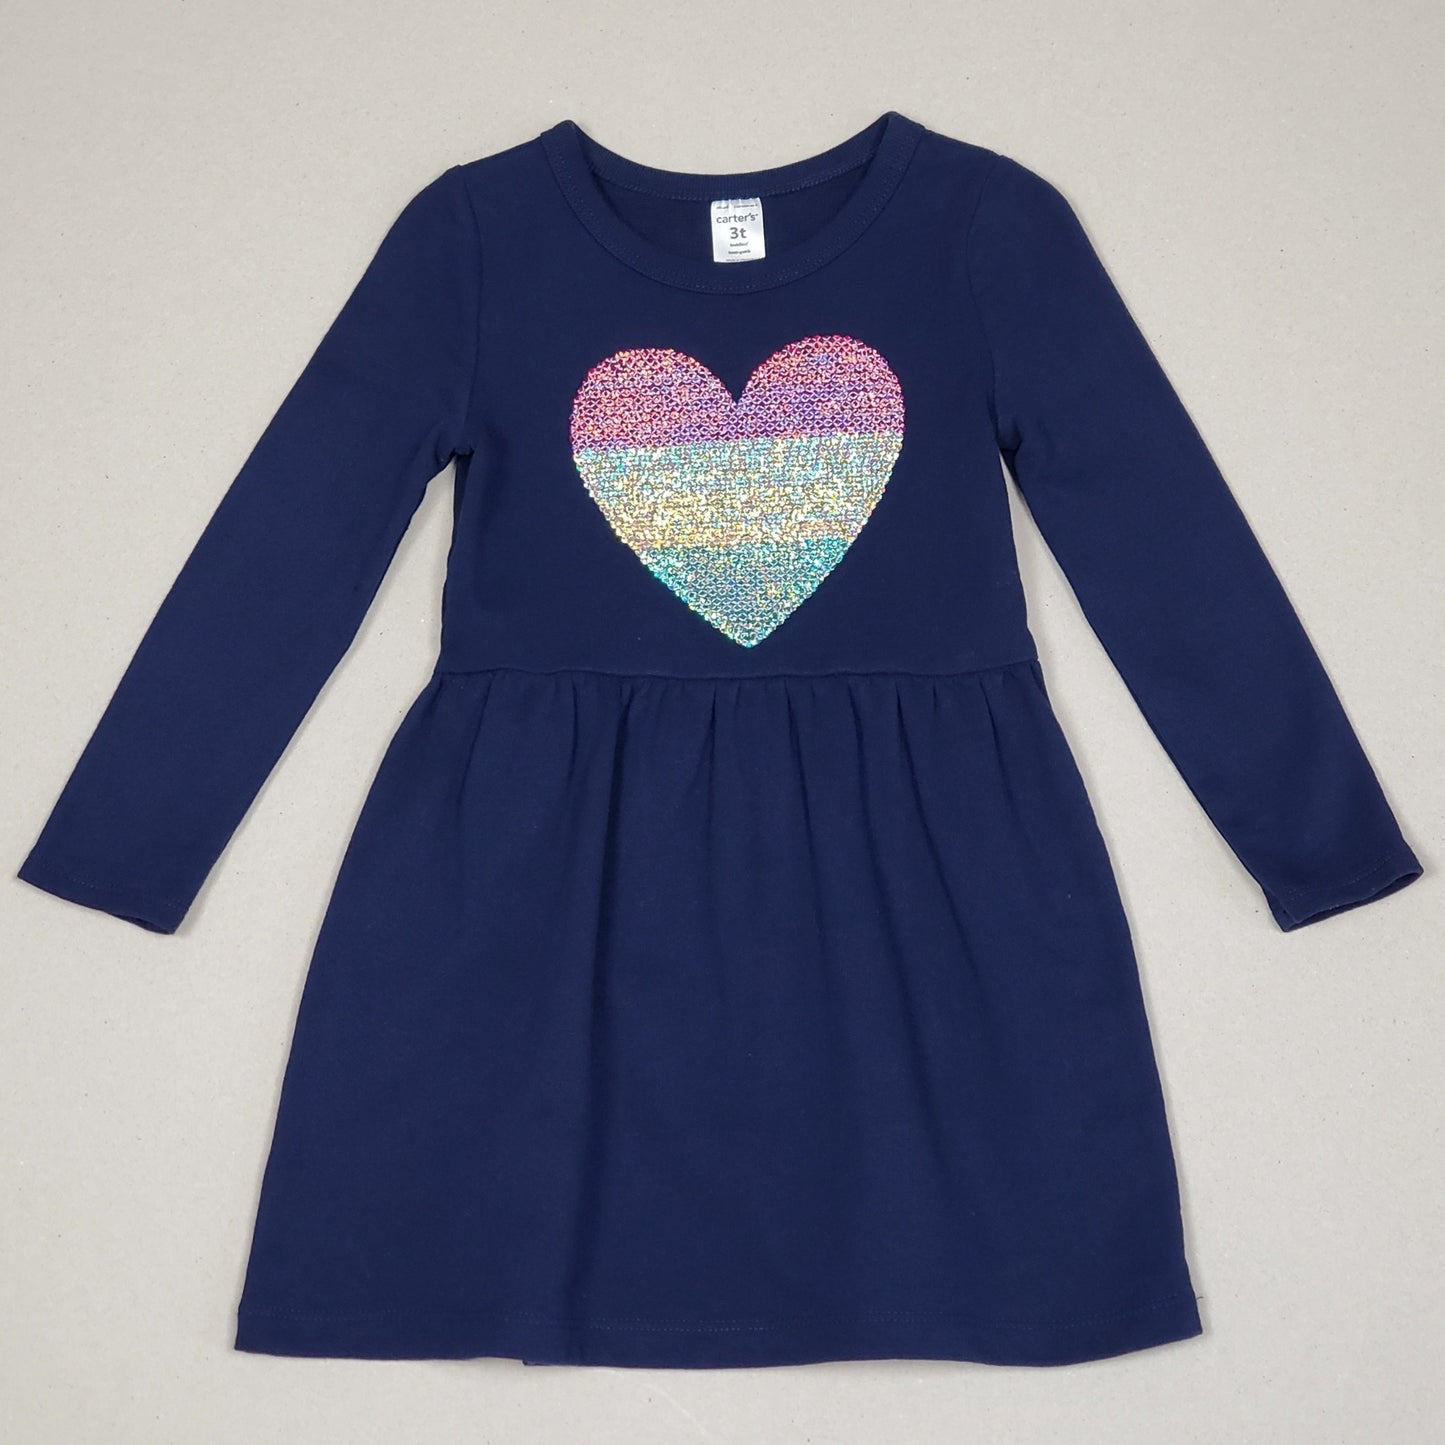 Carters Girls Navy Blue Sequence Heart Dress 3T Used View 1